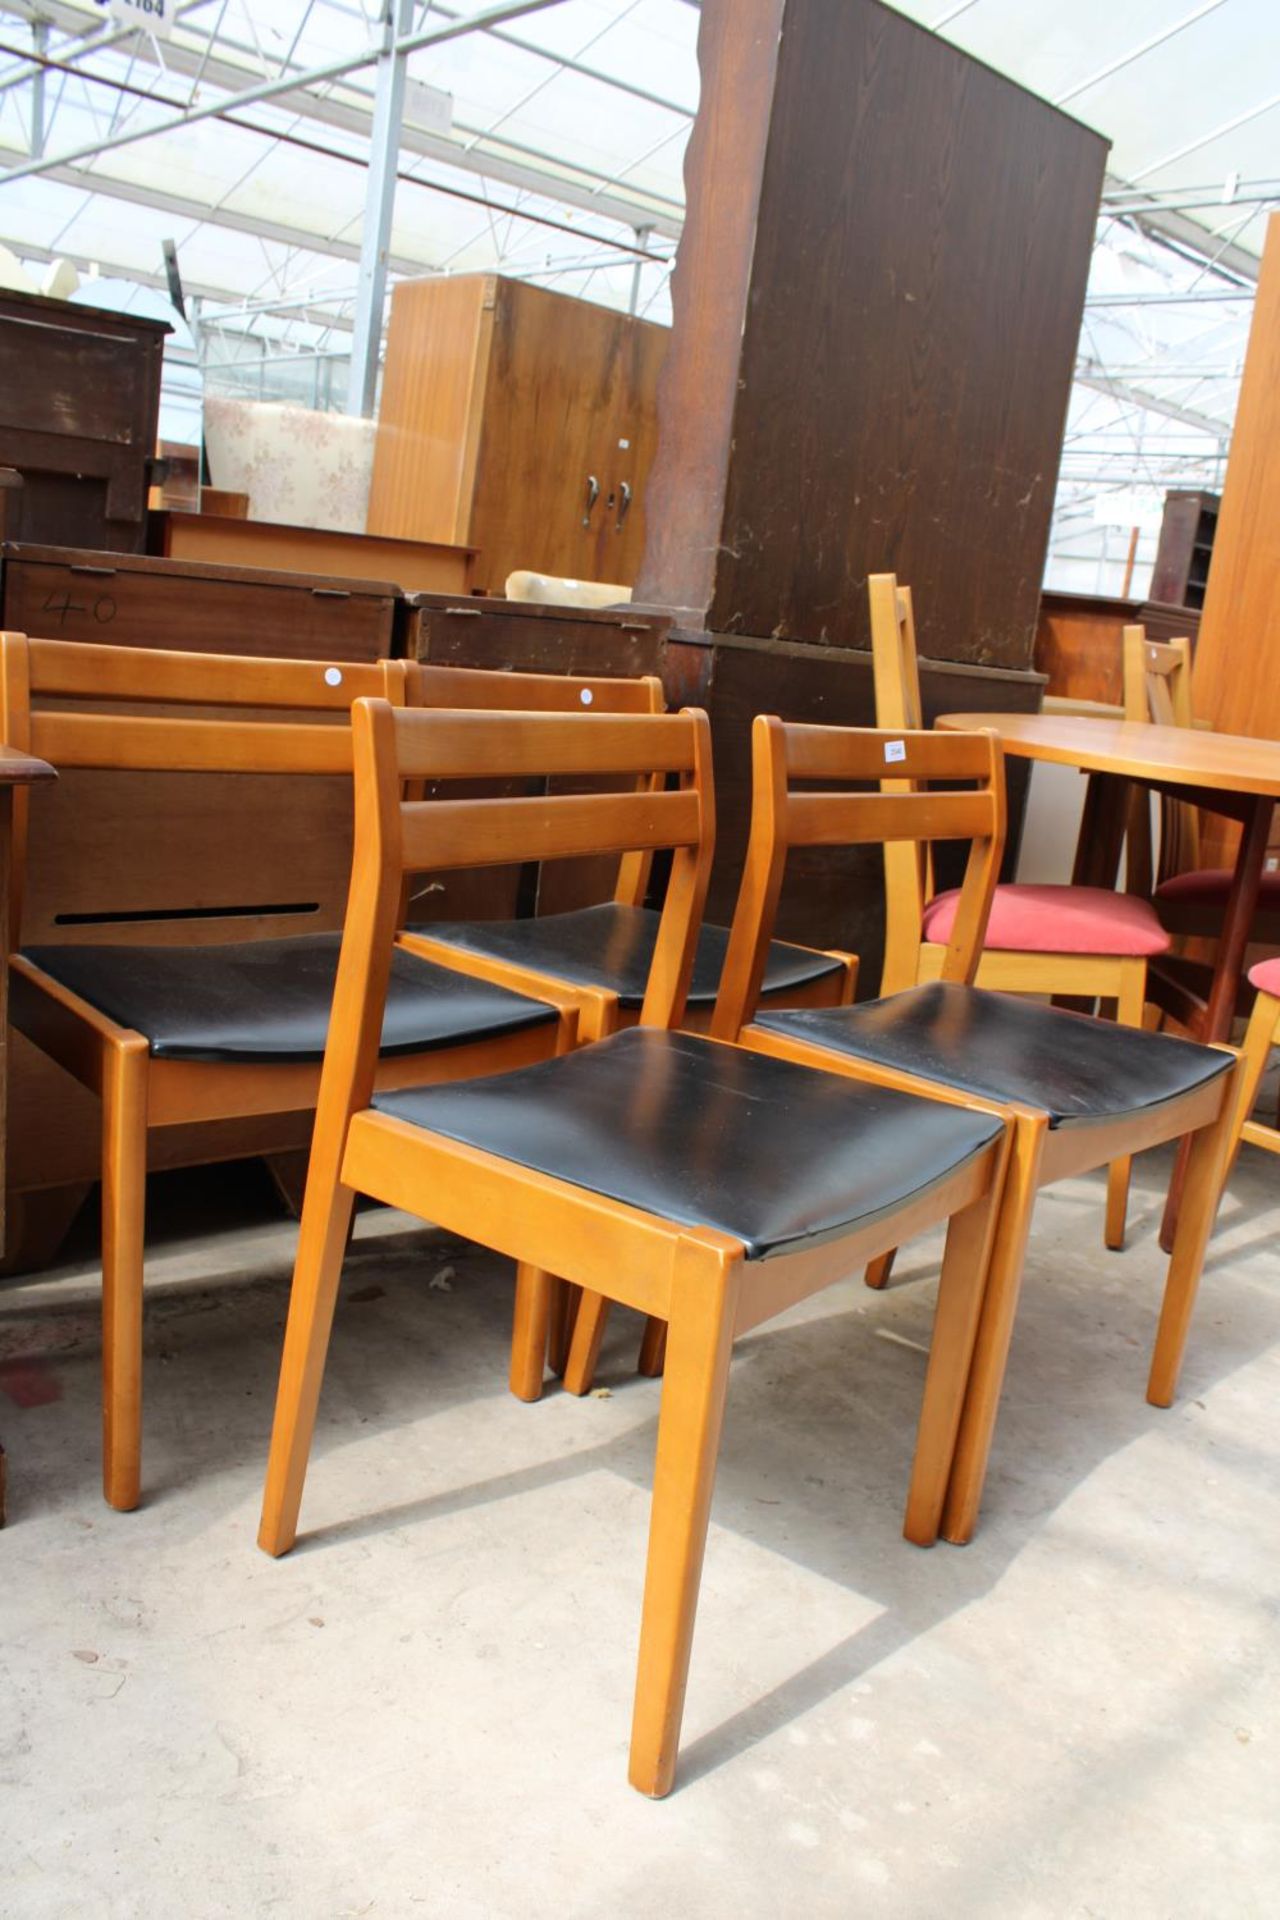 A SET OF 4 RETRO TEAK DINING CHAIRS WITH BLACK FAUX LEATHER SEATS - Image 2 of 2